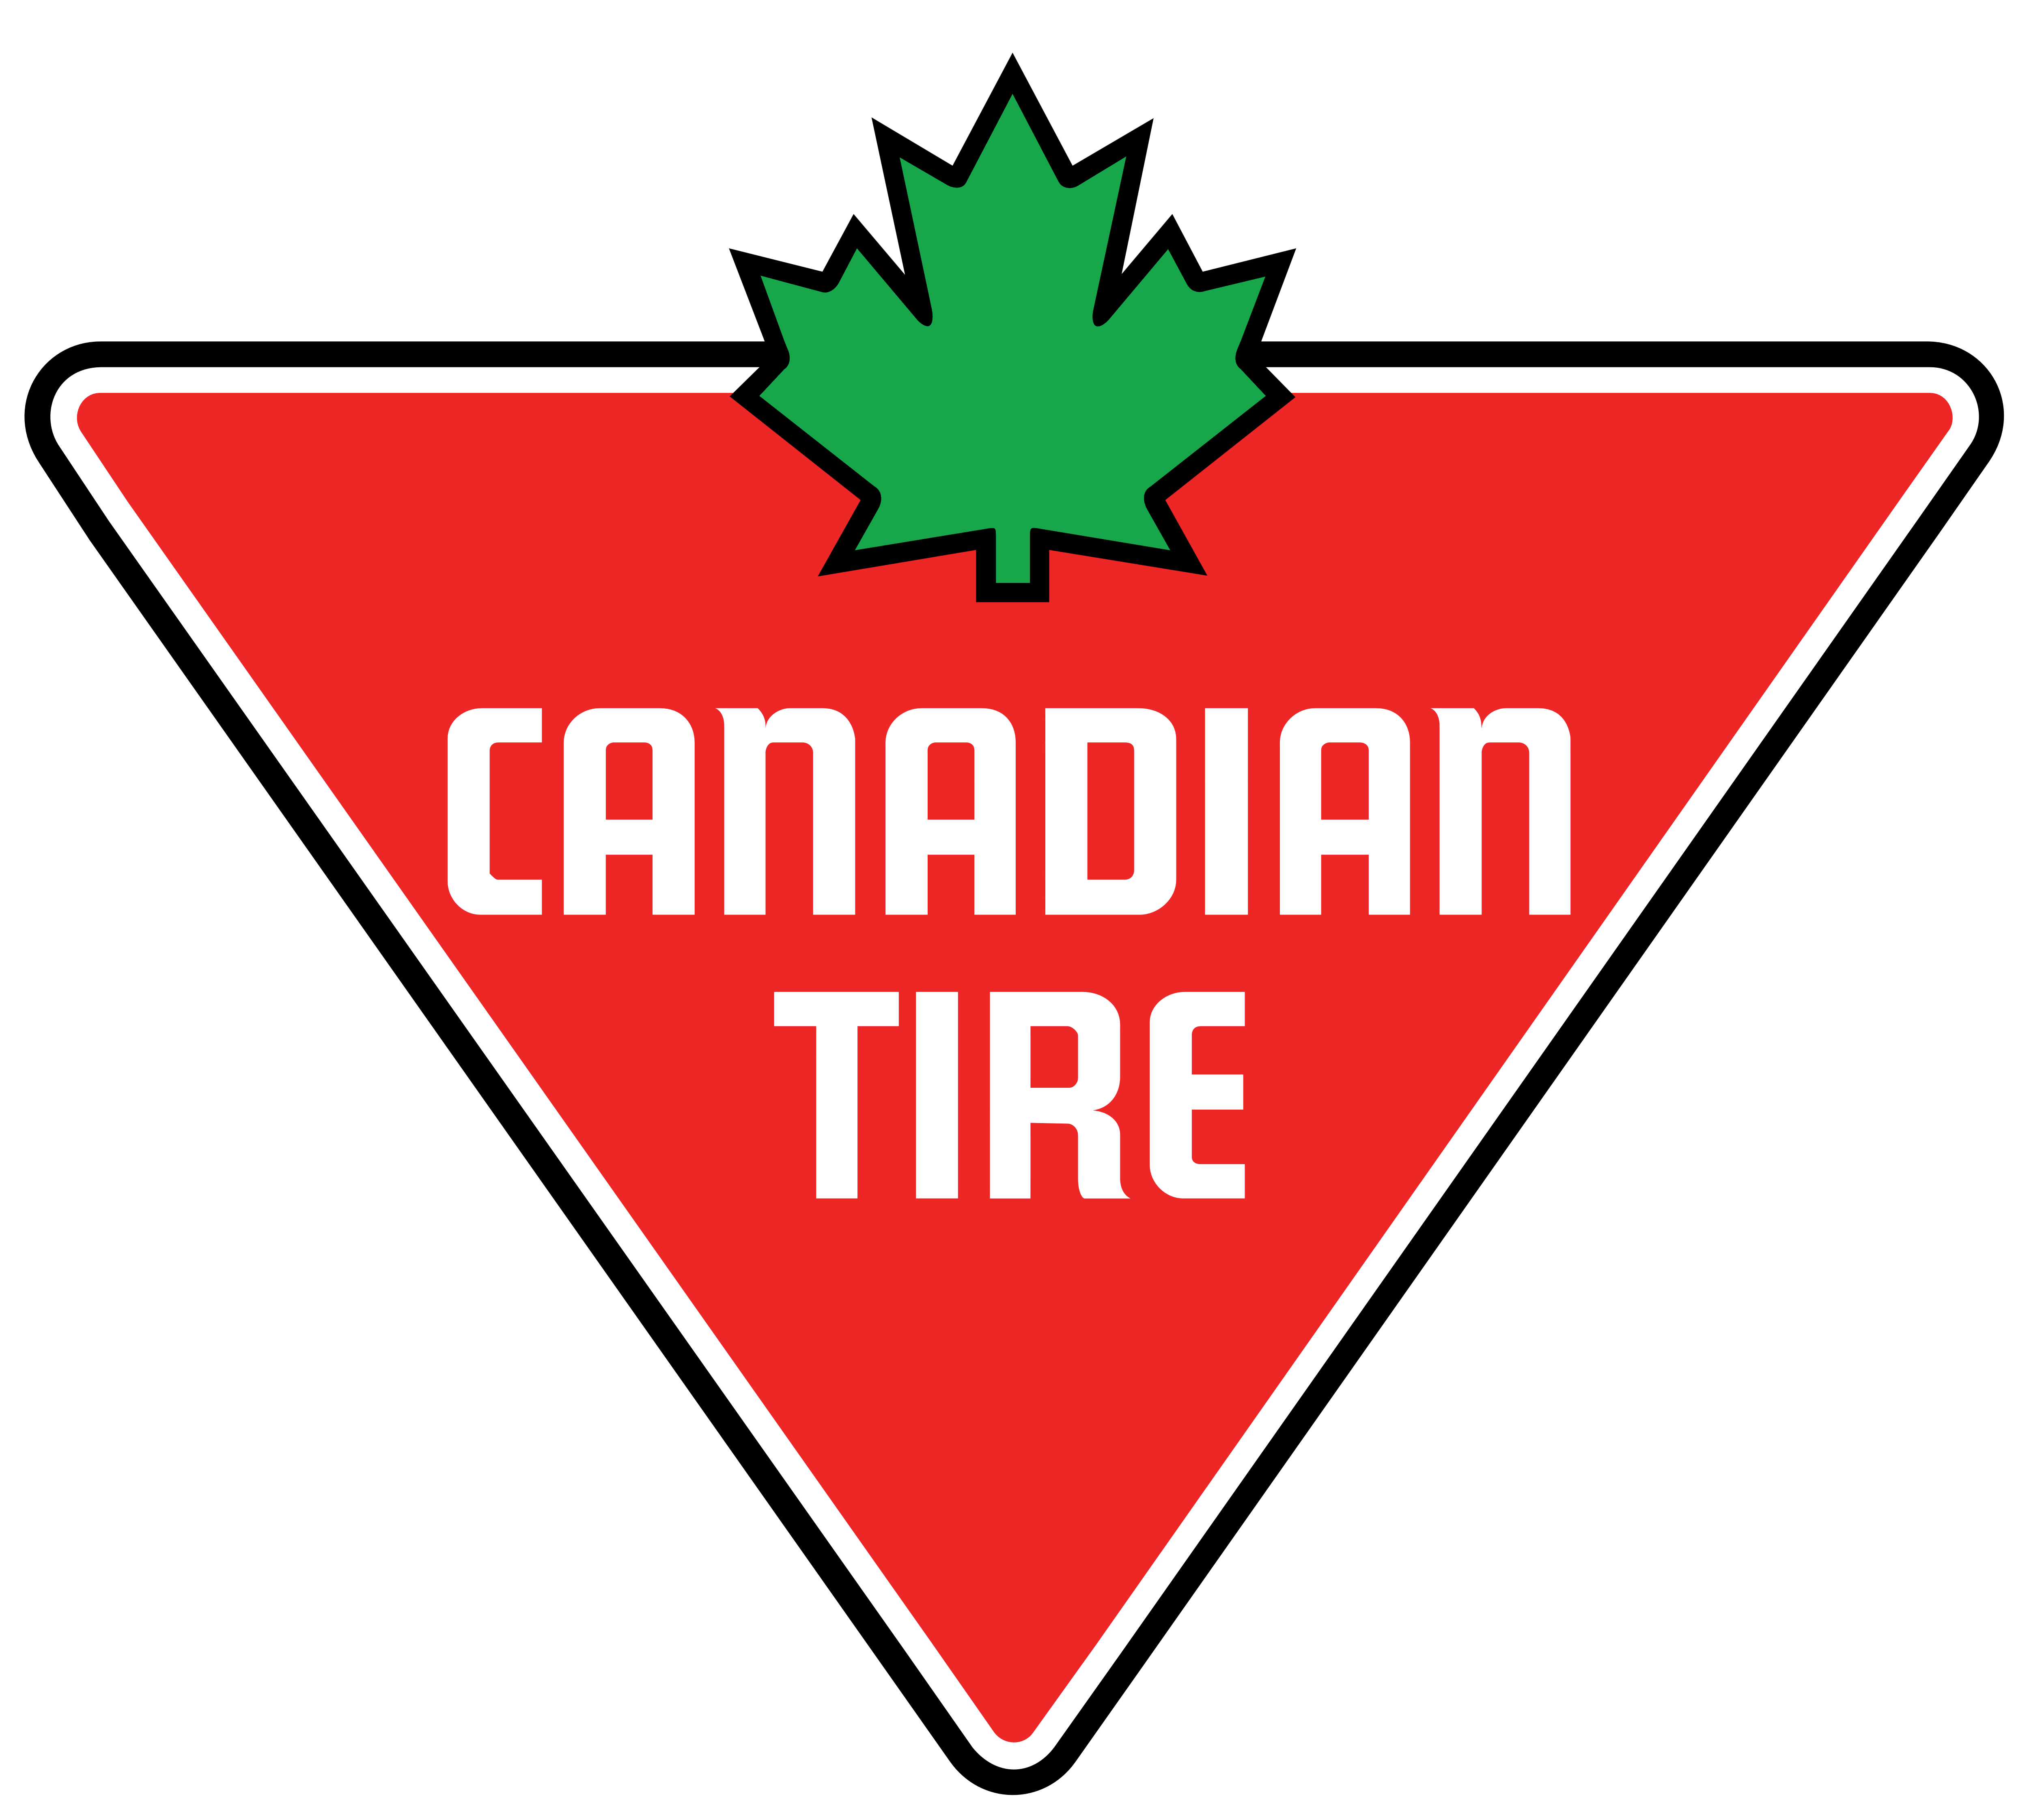 Canadian Tire logo linking to their website